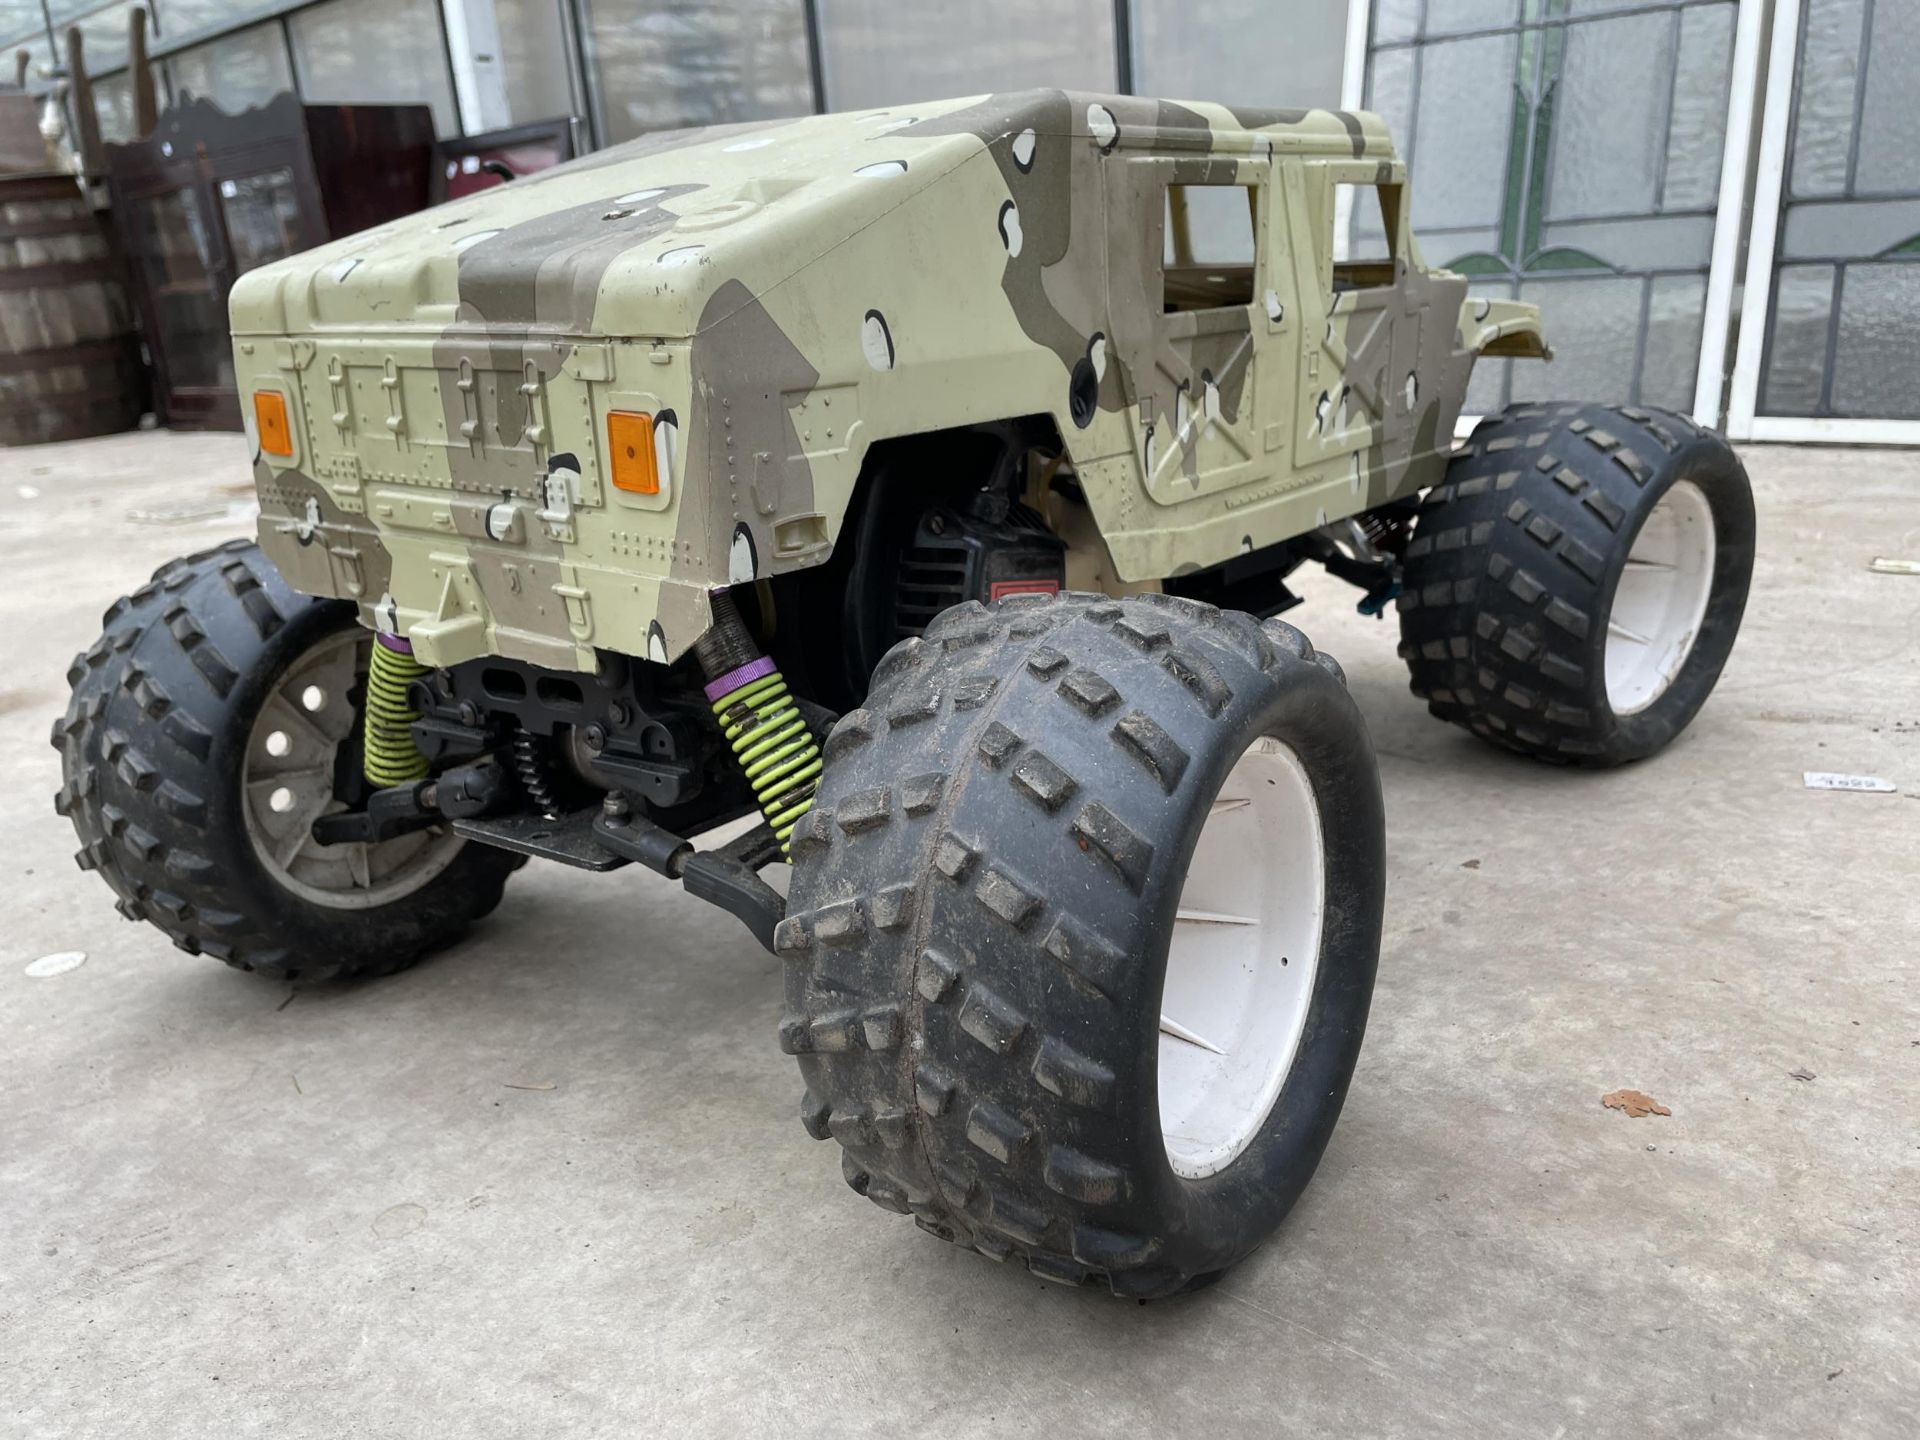 A PETROL ENGINE REMOTE CONTROL CAMMO JEEP - Image 3 of 10